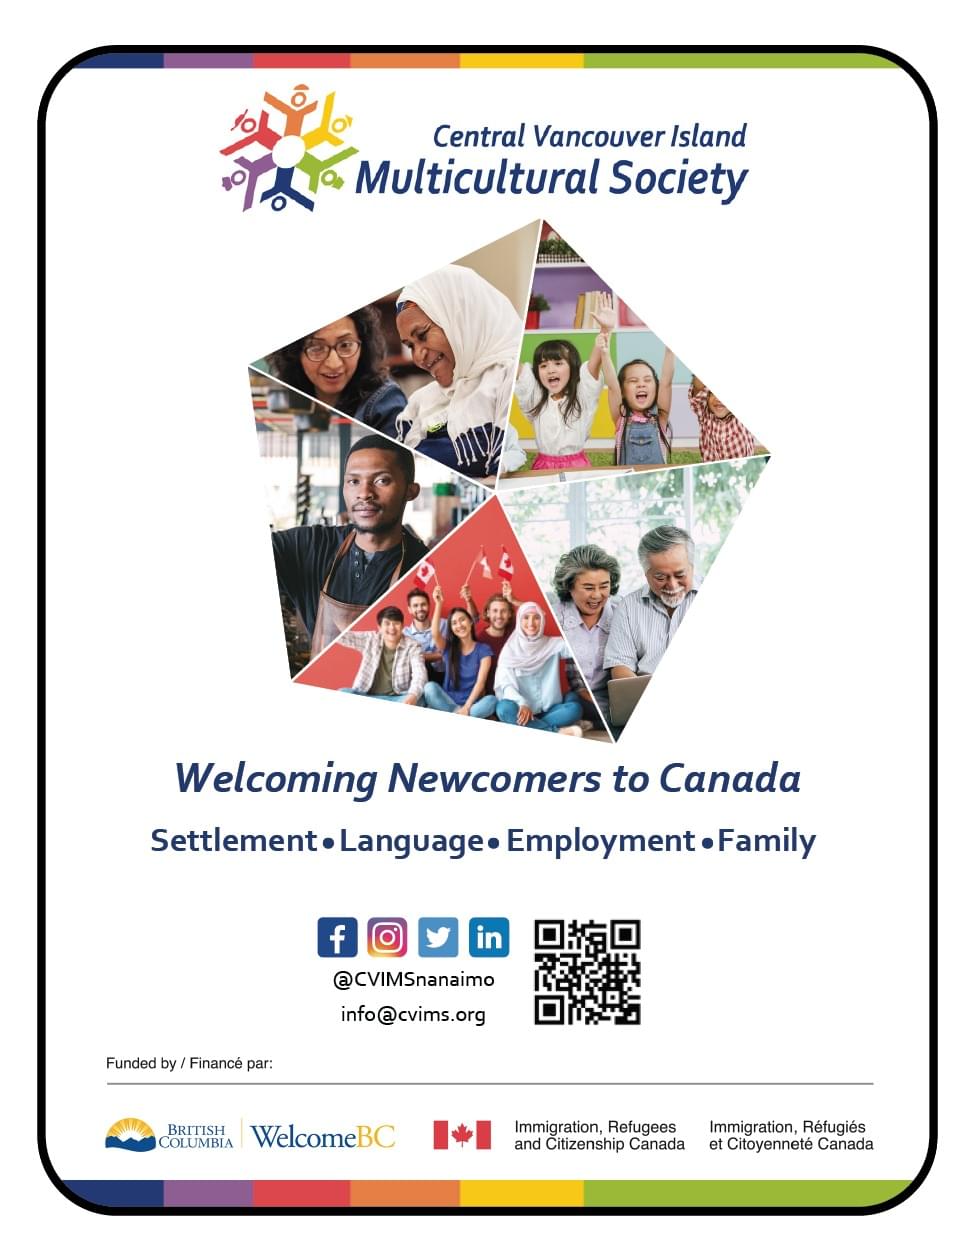 Central Vancouver Island Multicultural Society in Coffee News